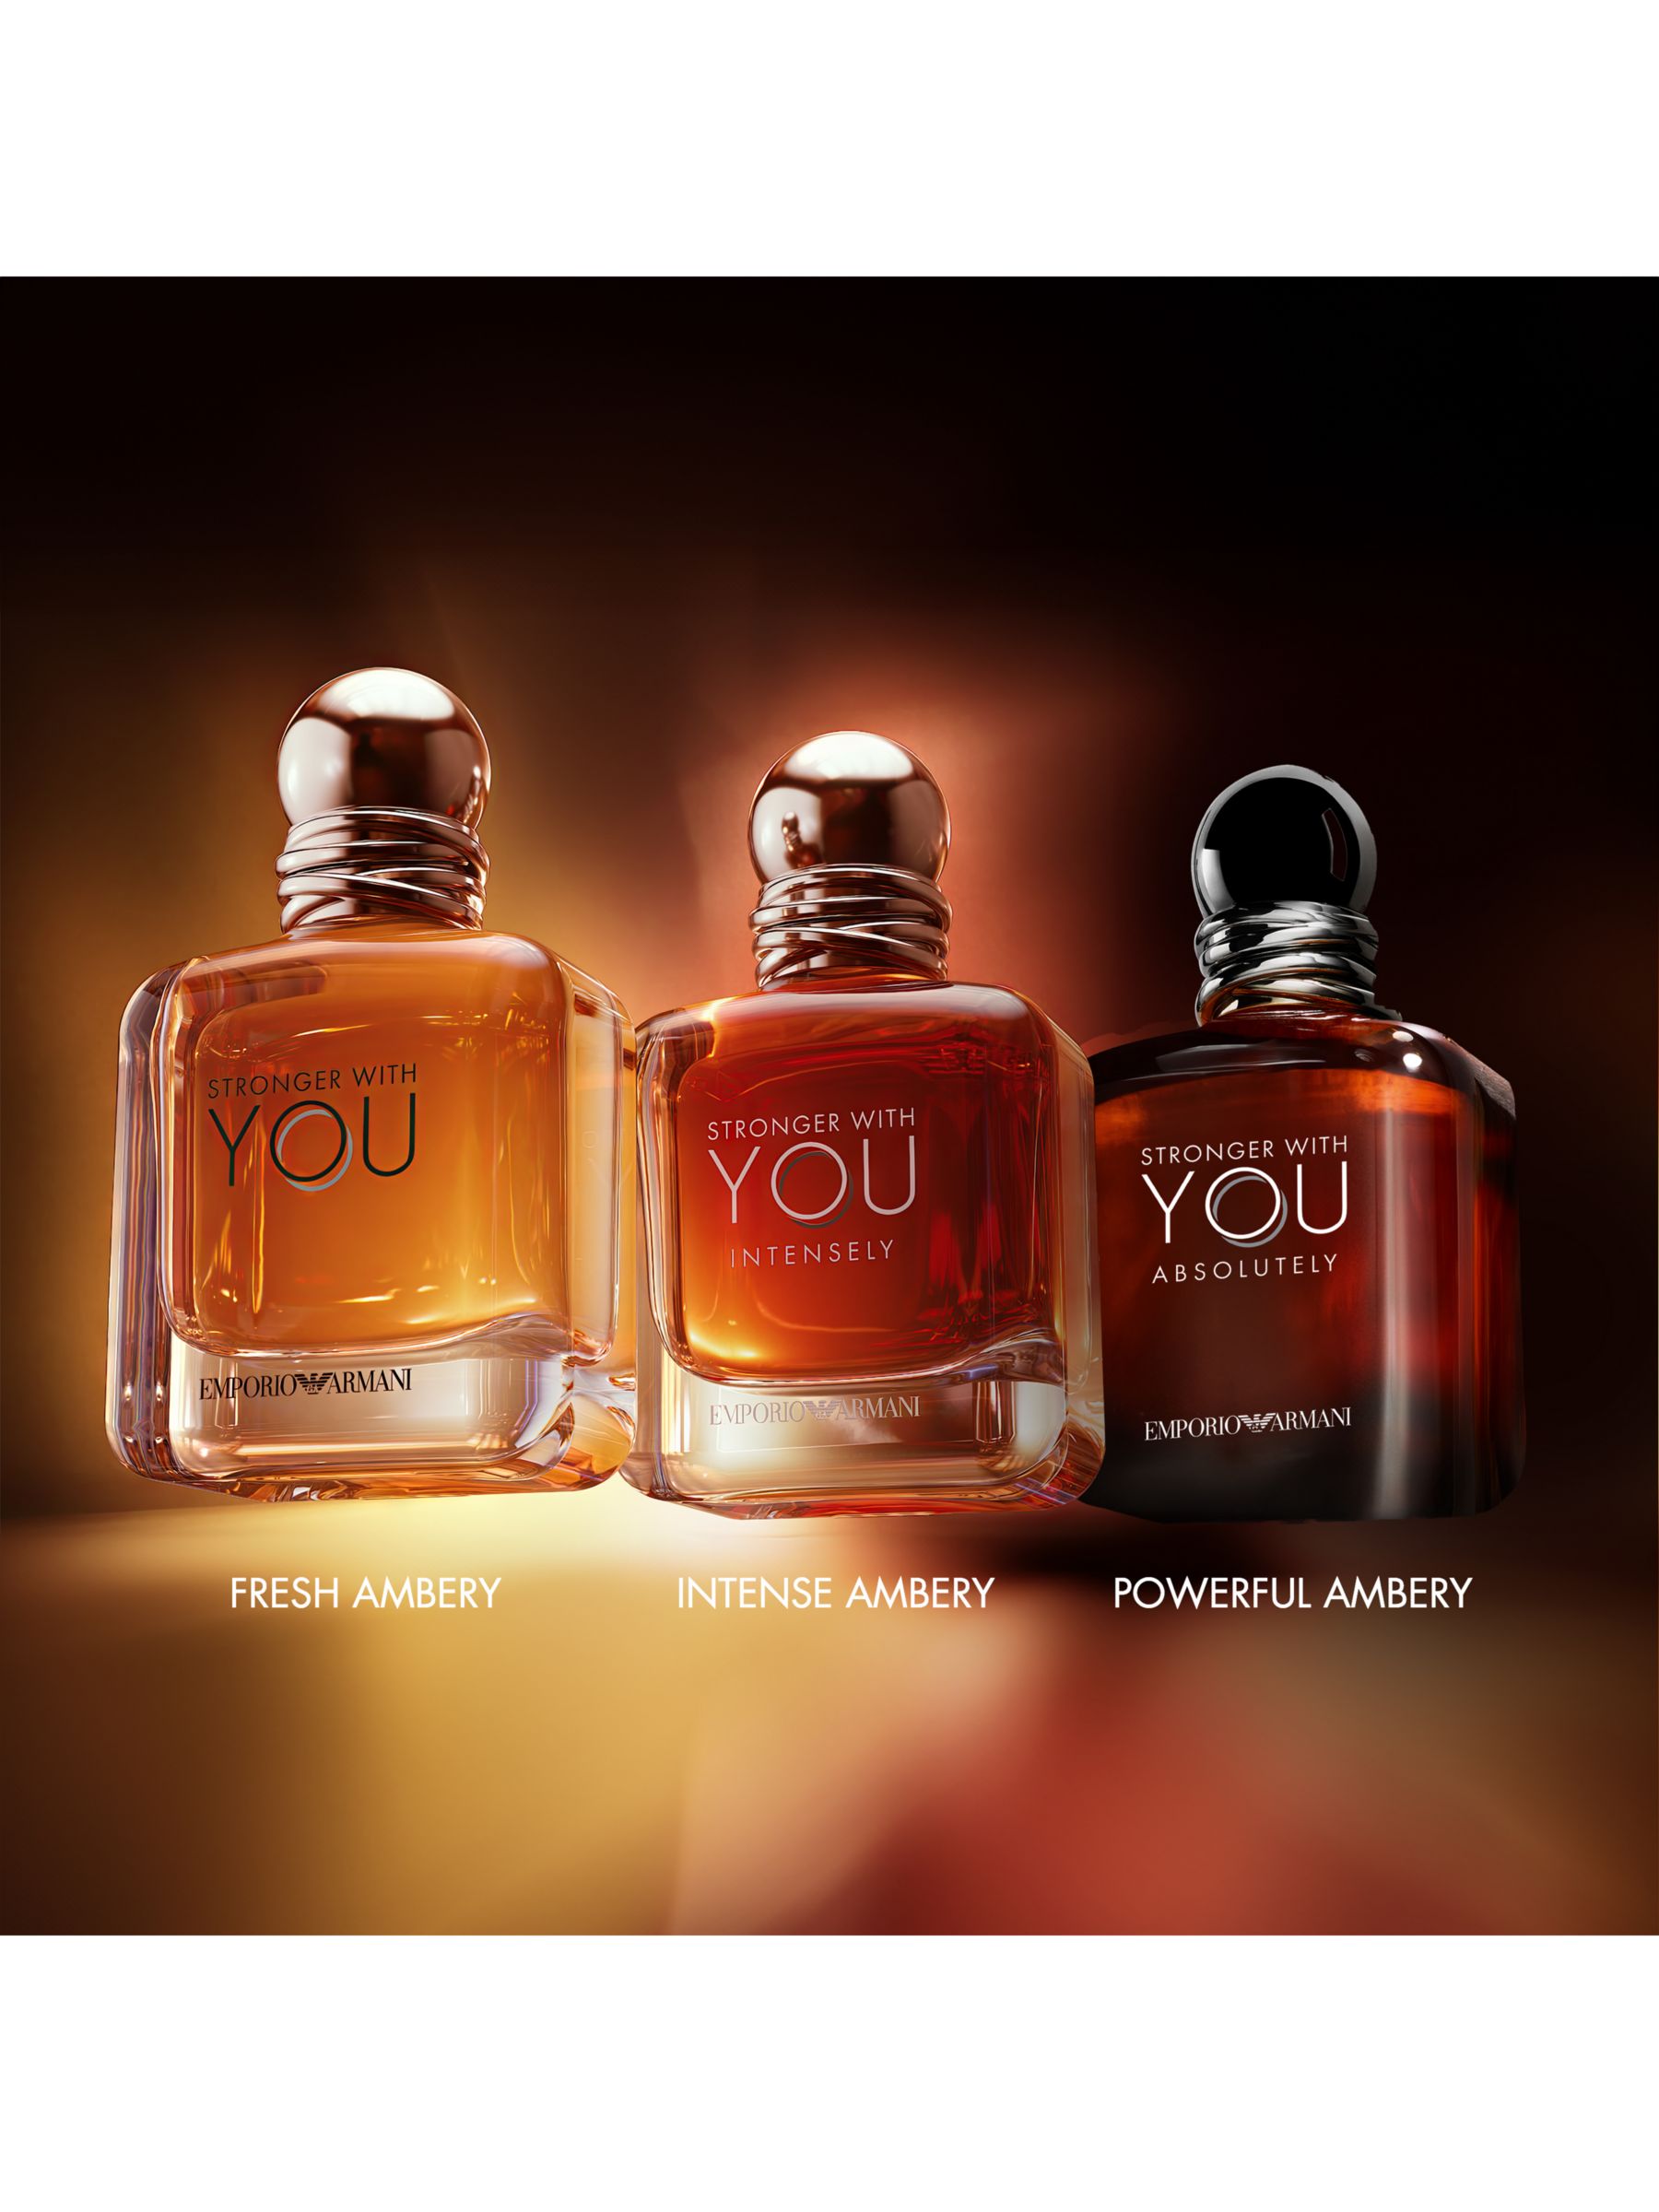 Emporio Armani Stronger With You Absolutely Parfum, 100ml at John Lewis ...